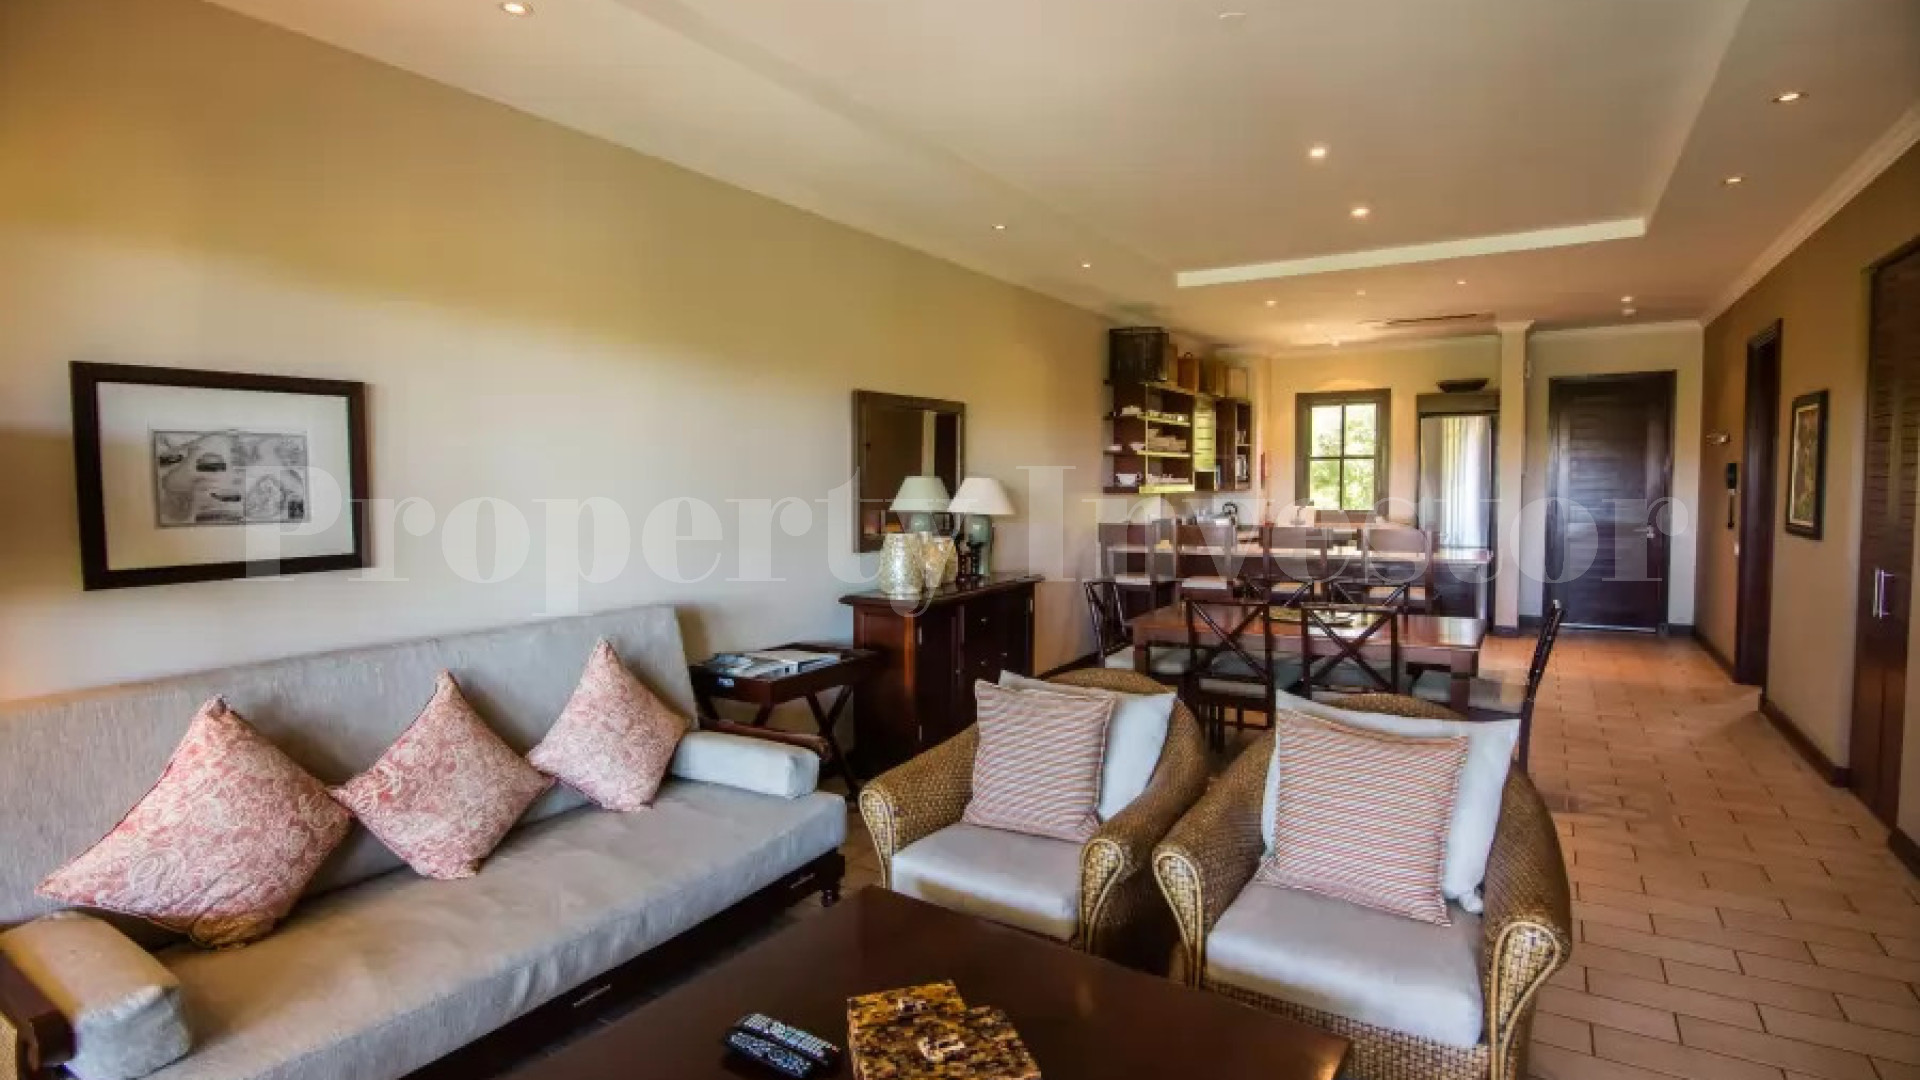 Immaculate 2 Bedroom Luxury Apartment with Extra Large Berth for Sale on Eden Island, Seychelles